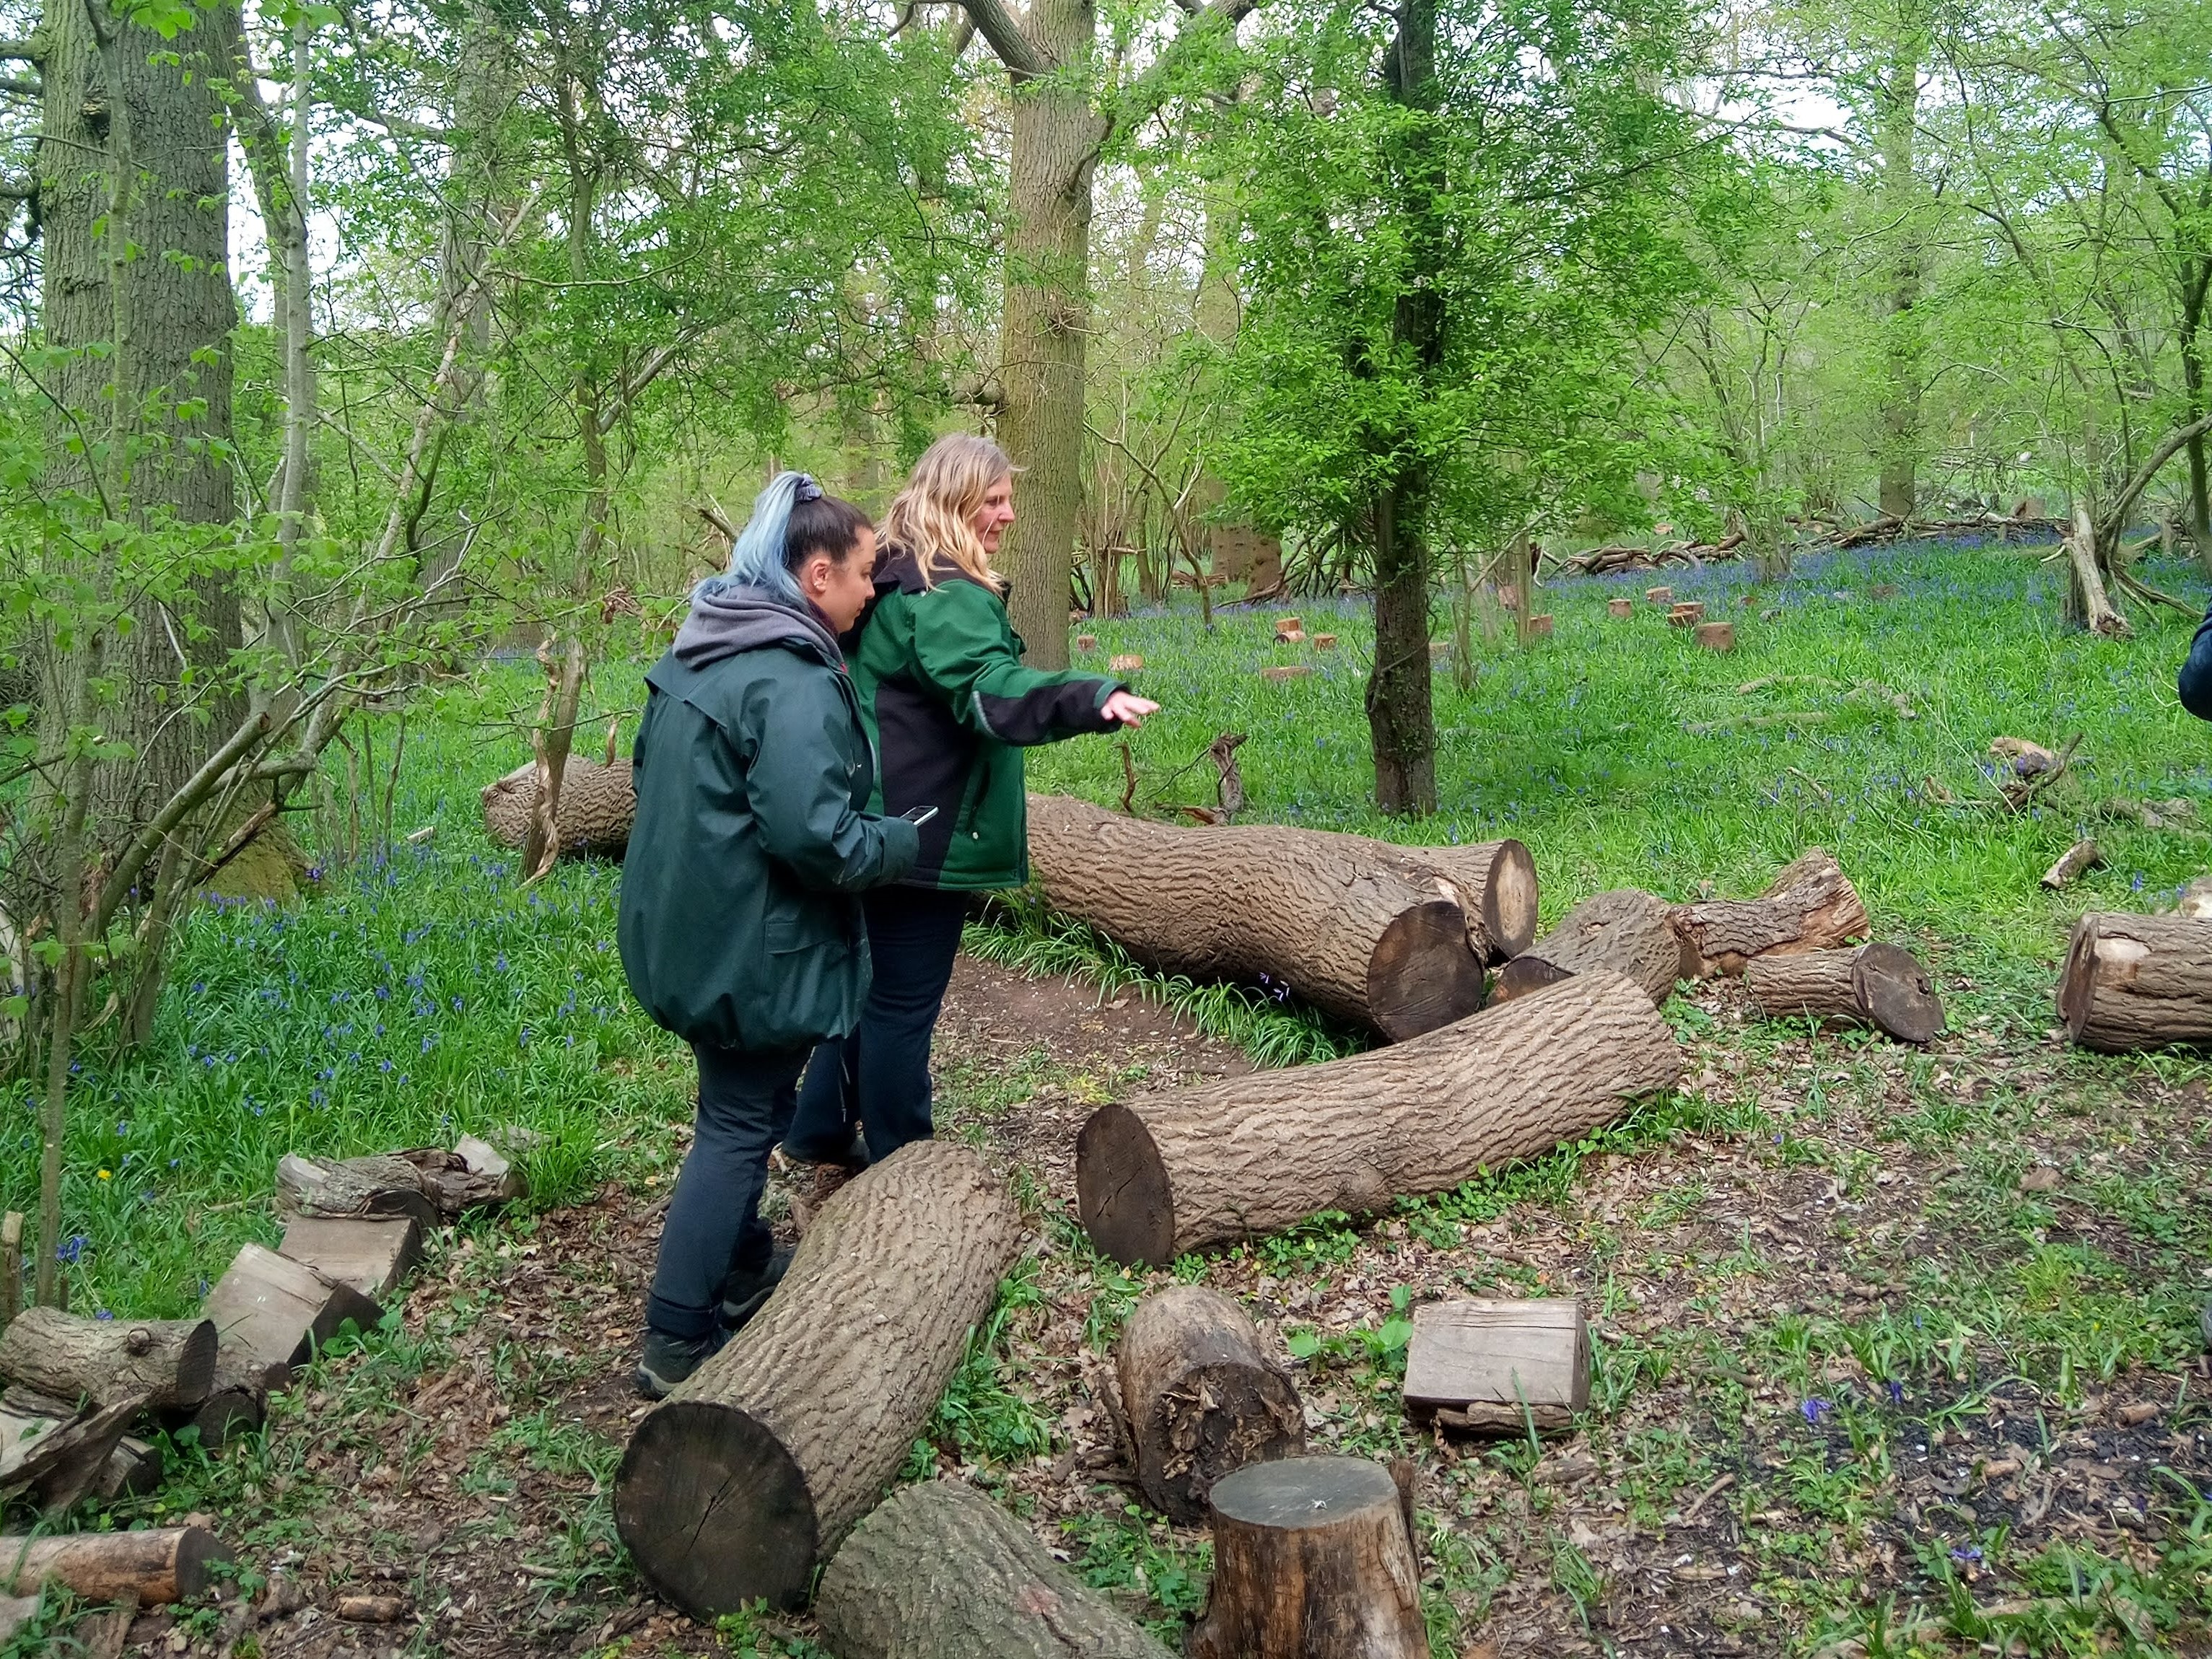 Tasha and Elain standing by some fallen tree trunks in Wild Wood 2